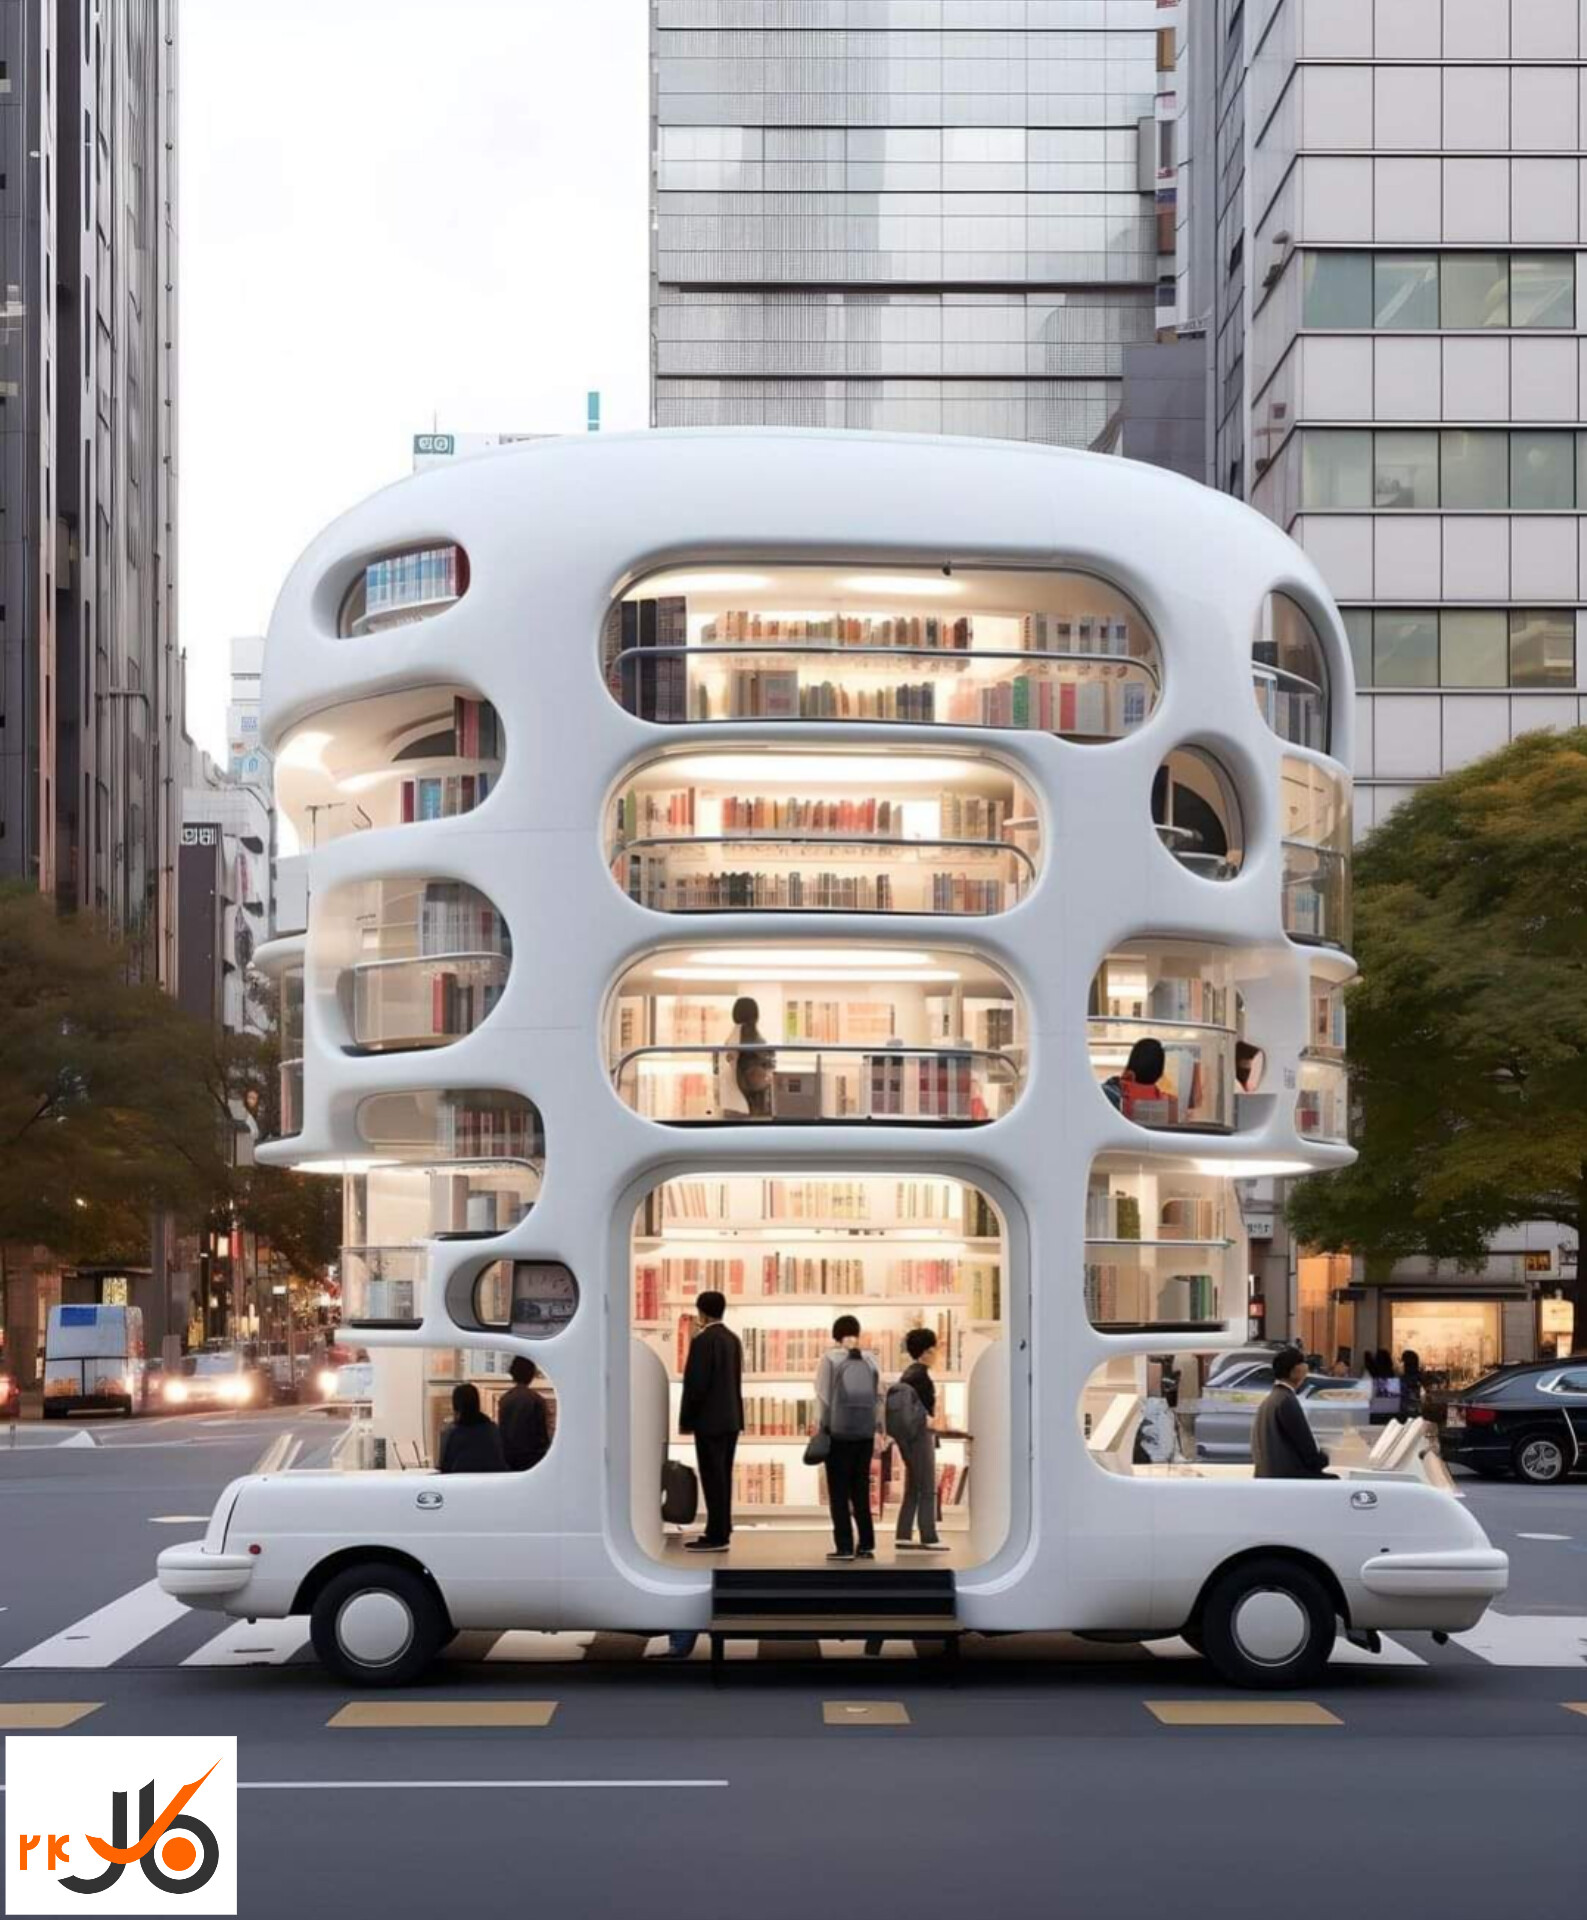 Mobile library in China